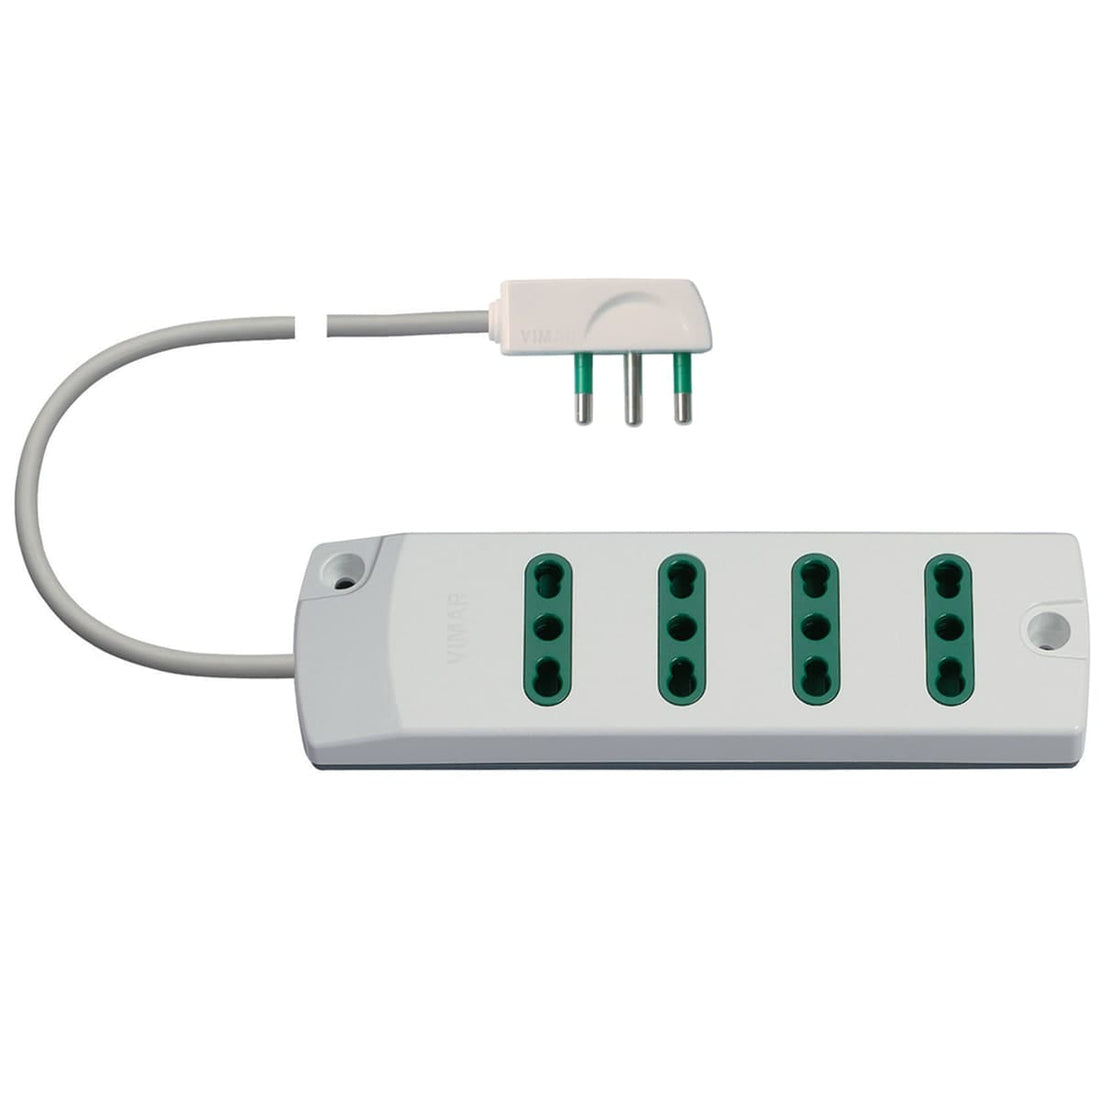 MULTISOCKET PLUG 16A 4 SOCKETS 2-PIN 10/16A CABLE 1.5MT WHITE - best price from Maltashopper.com BR420110404